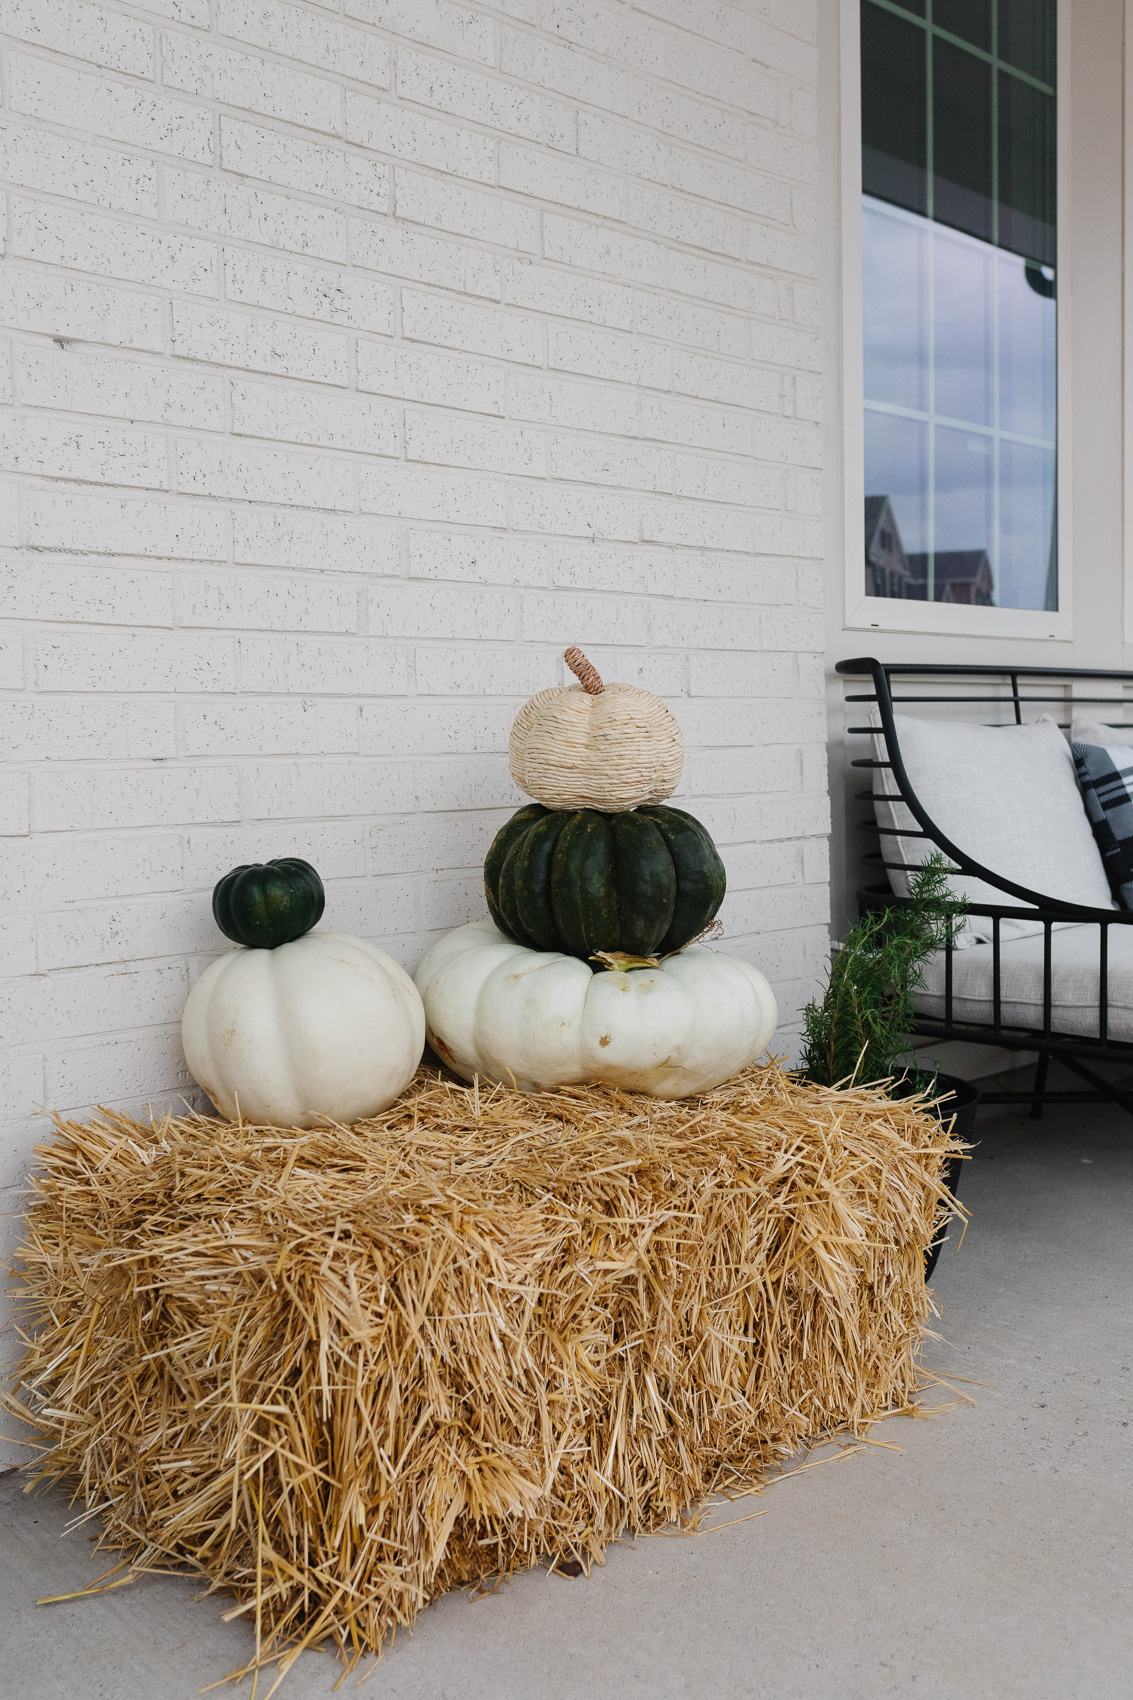 Fall front porch decor with a hay bale, white and green pumpkins, CB2 Breton sofa and plaid pillows